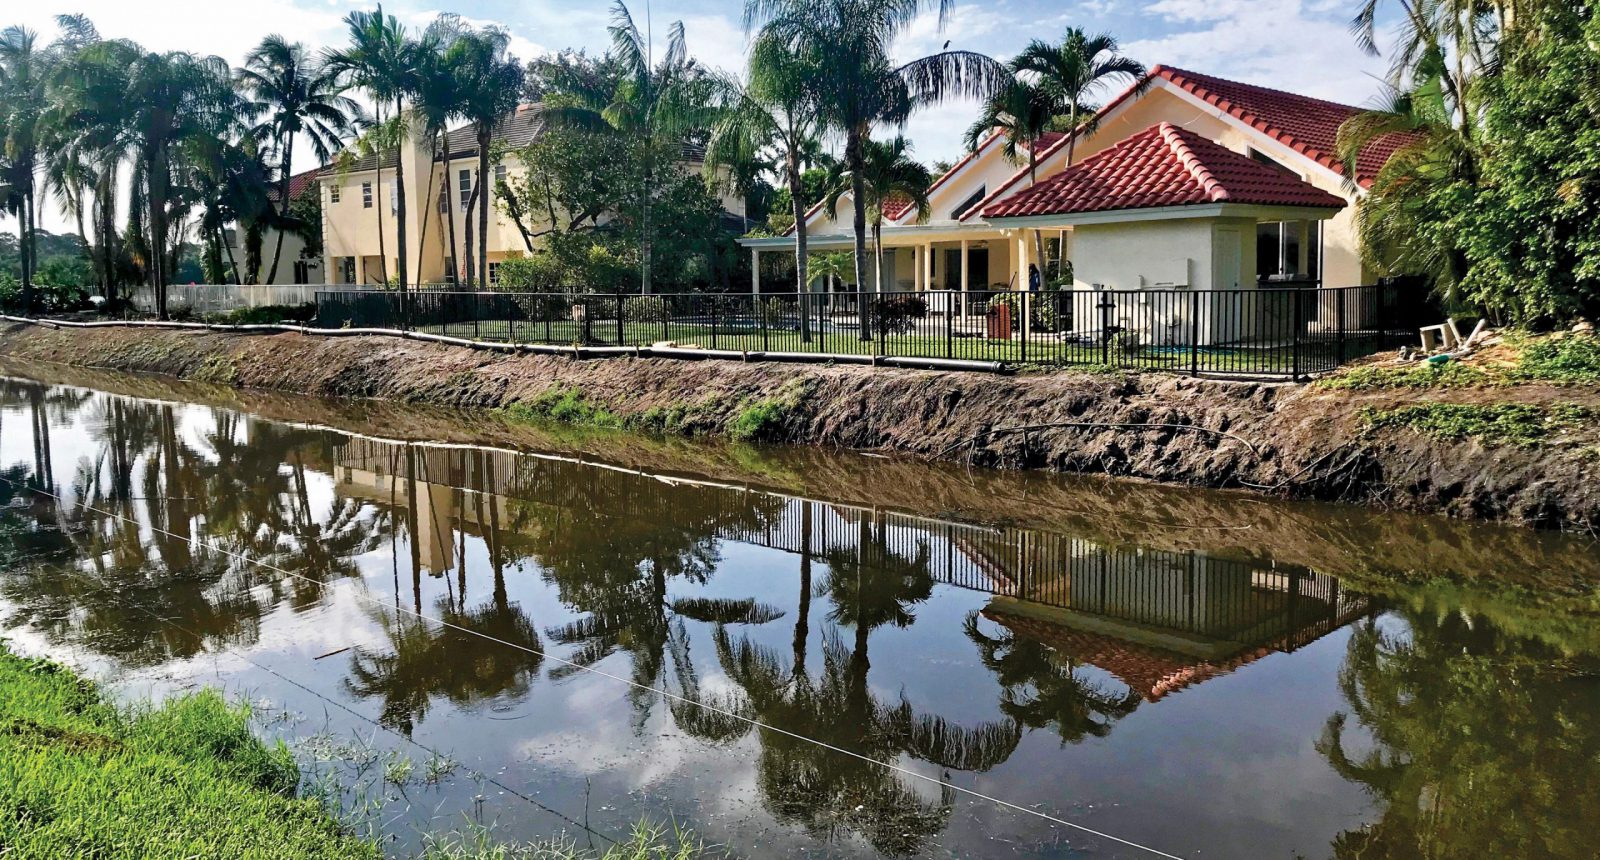 erosion control and shoreline stabilization with beneficial plants - florida - before - hoa and community